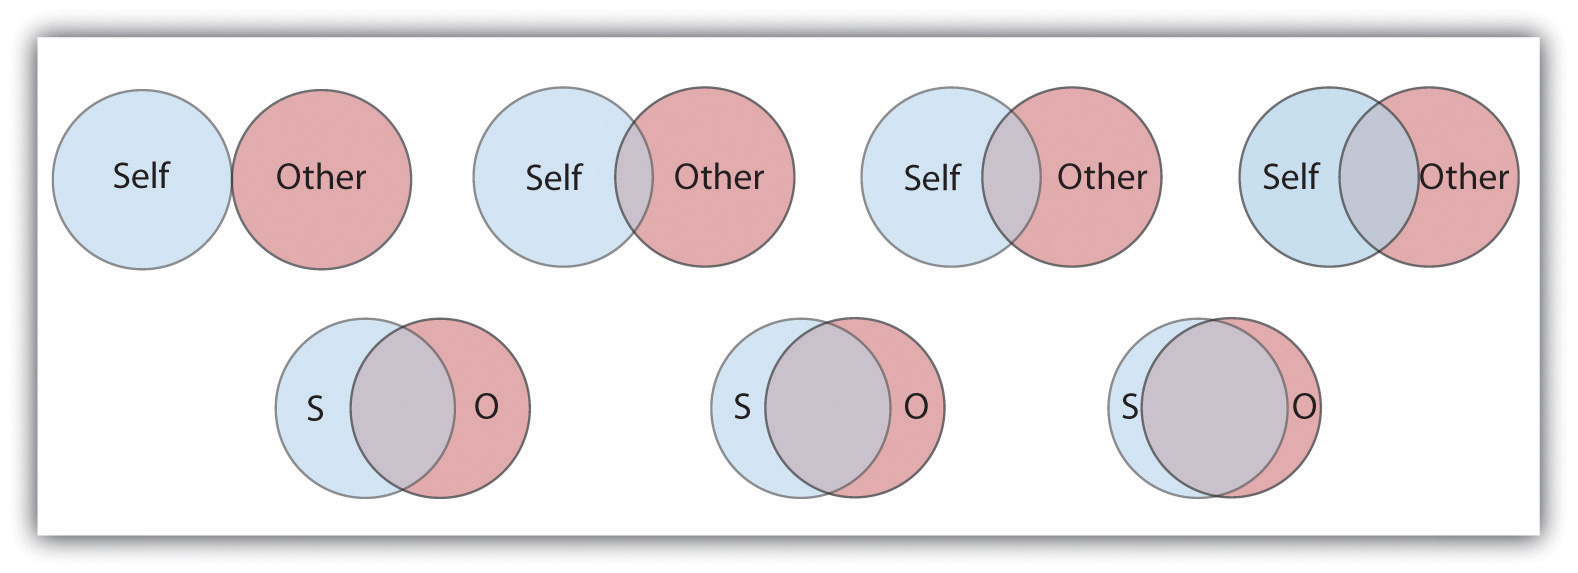 These Venn diagrams show seven degrees of relation between the Self and the Other.